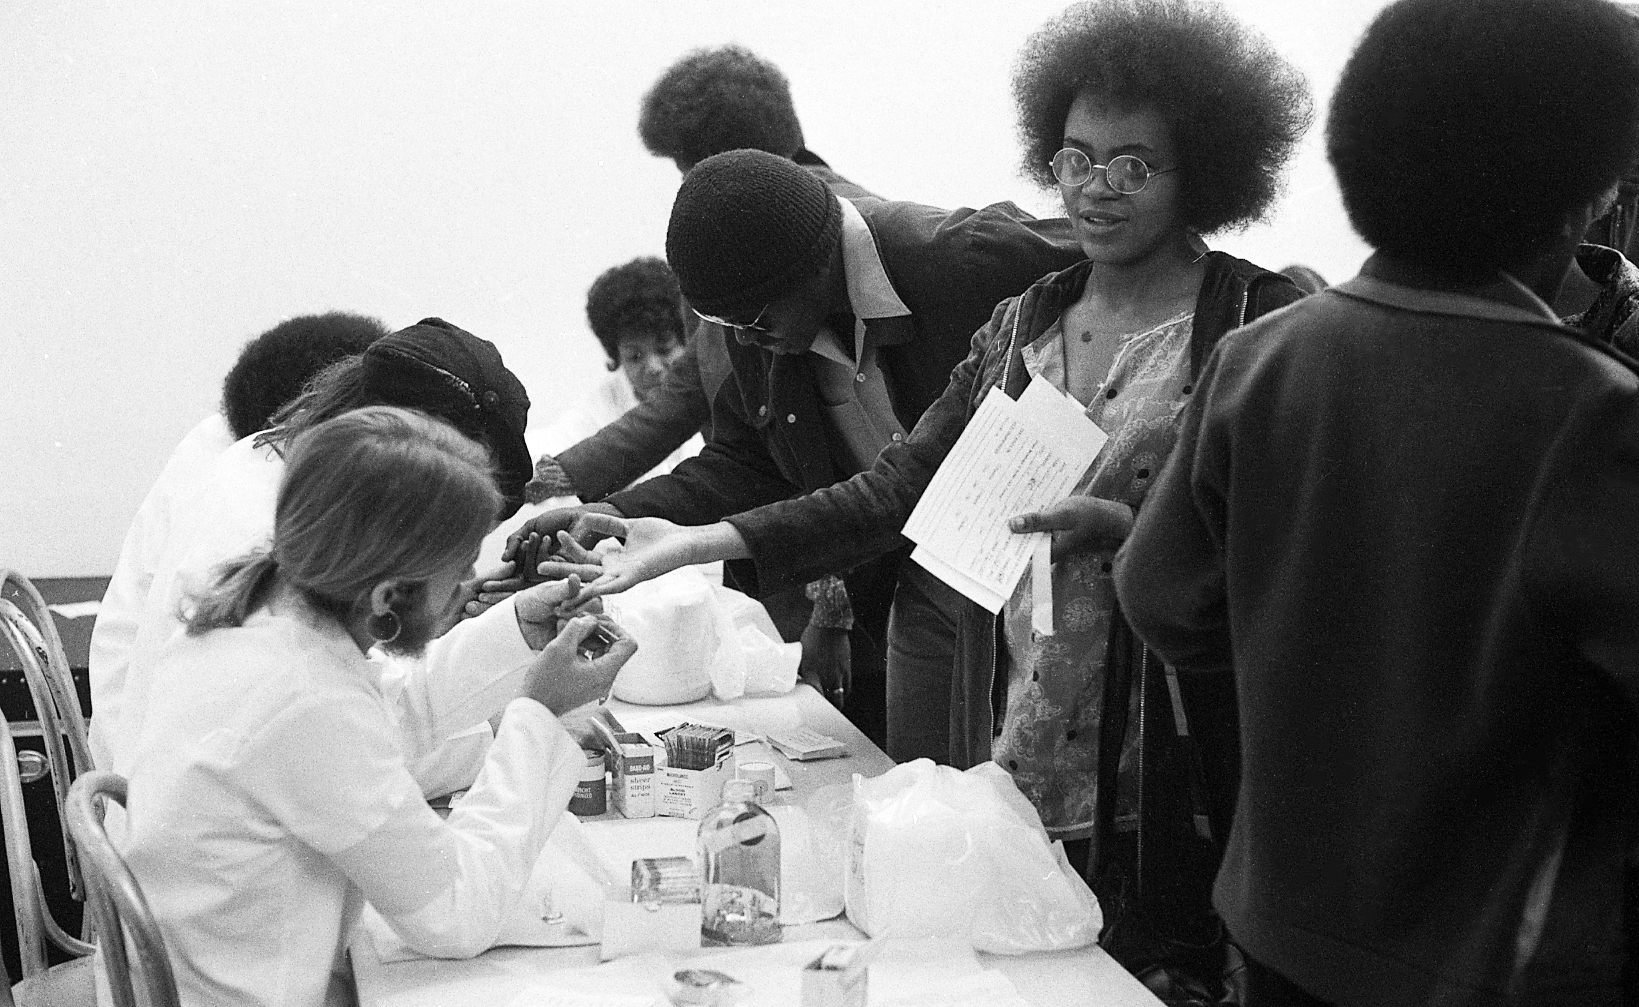 The Black Panthers put on a Black Community Survival Conference at the Civic Auditorium in Oakland, Calif. on March 29, 1972. Participants could take sickle cell anemia tests, register to vote, and receive bags of groceries. (Dave Randolph—The San Francisco Chronicle/Getty Images)